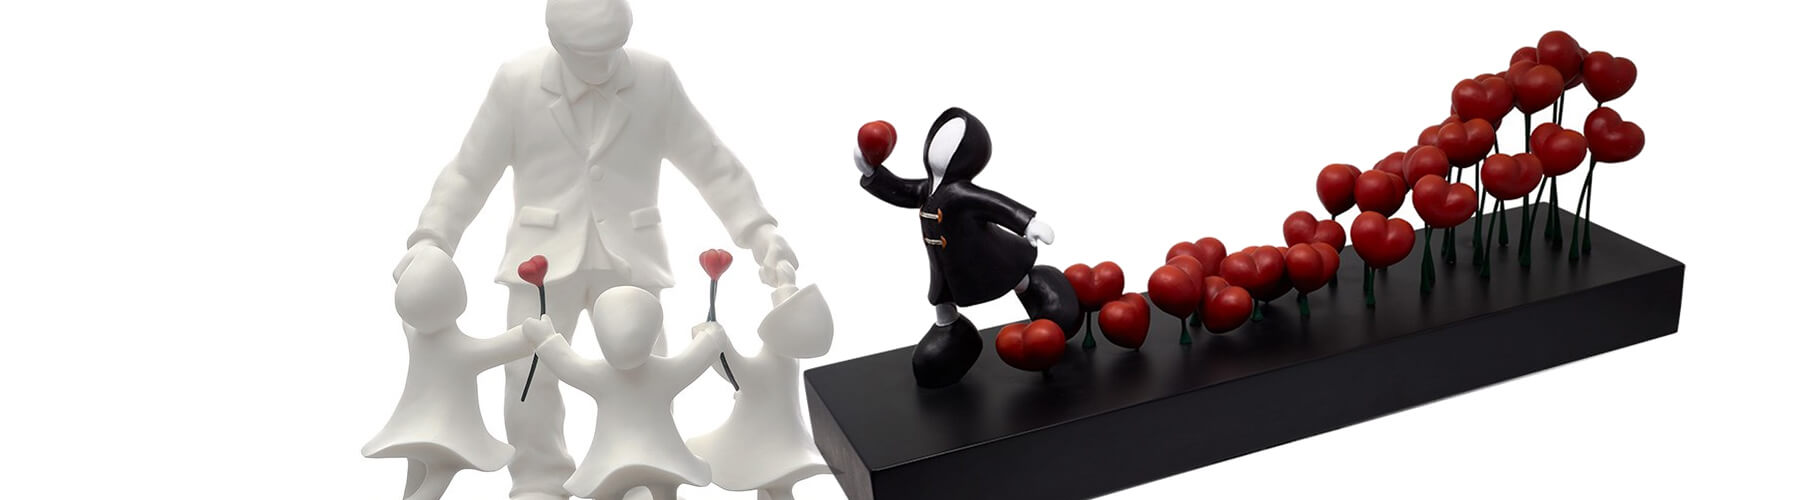 two sculptures, in black & white, featuring bright red hearts and featureless figures